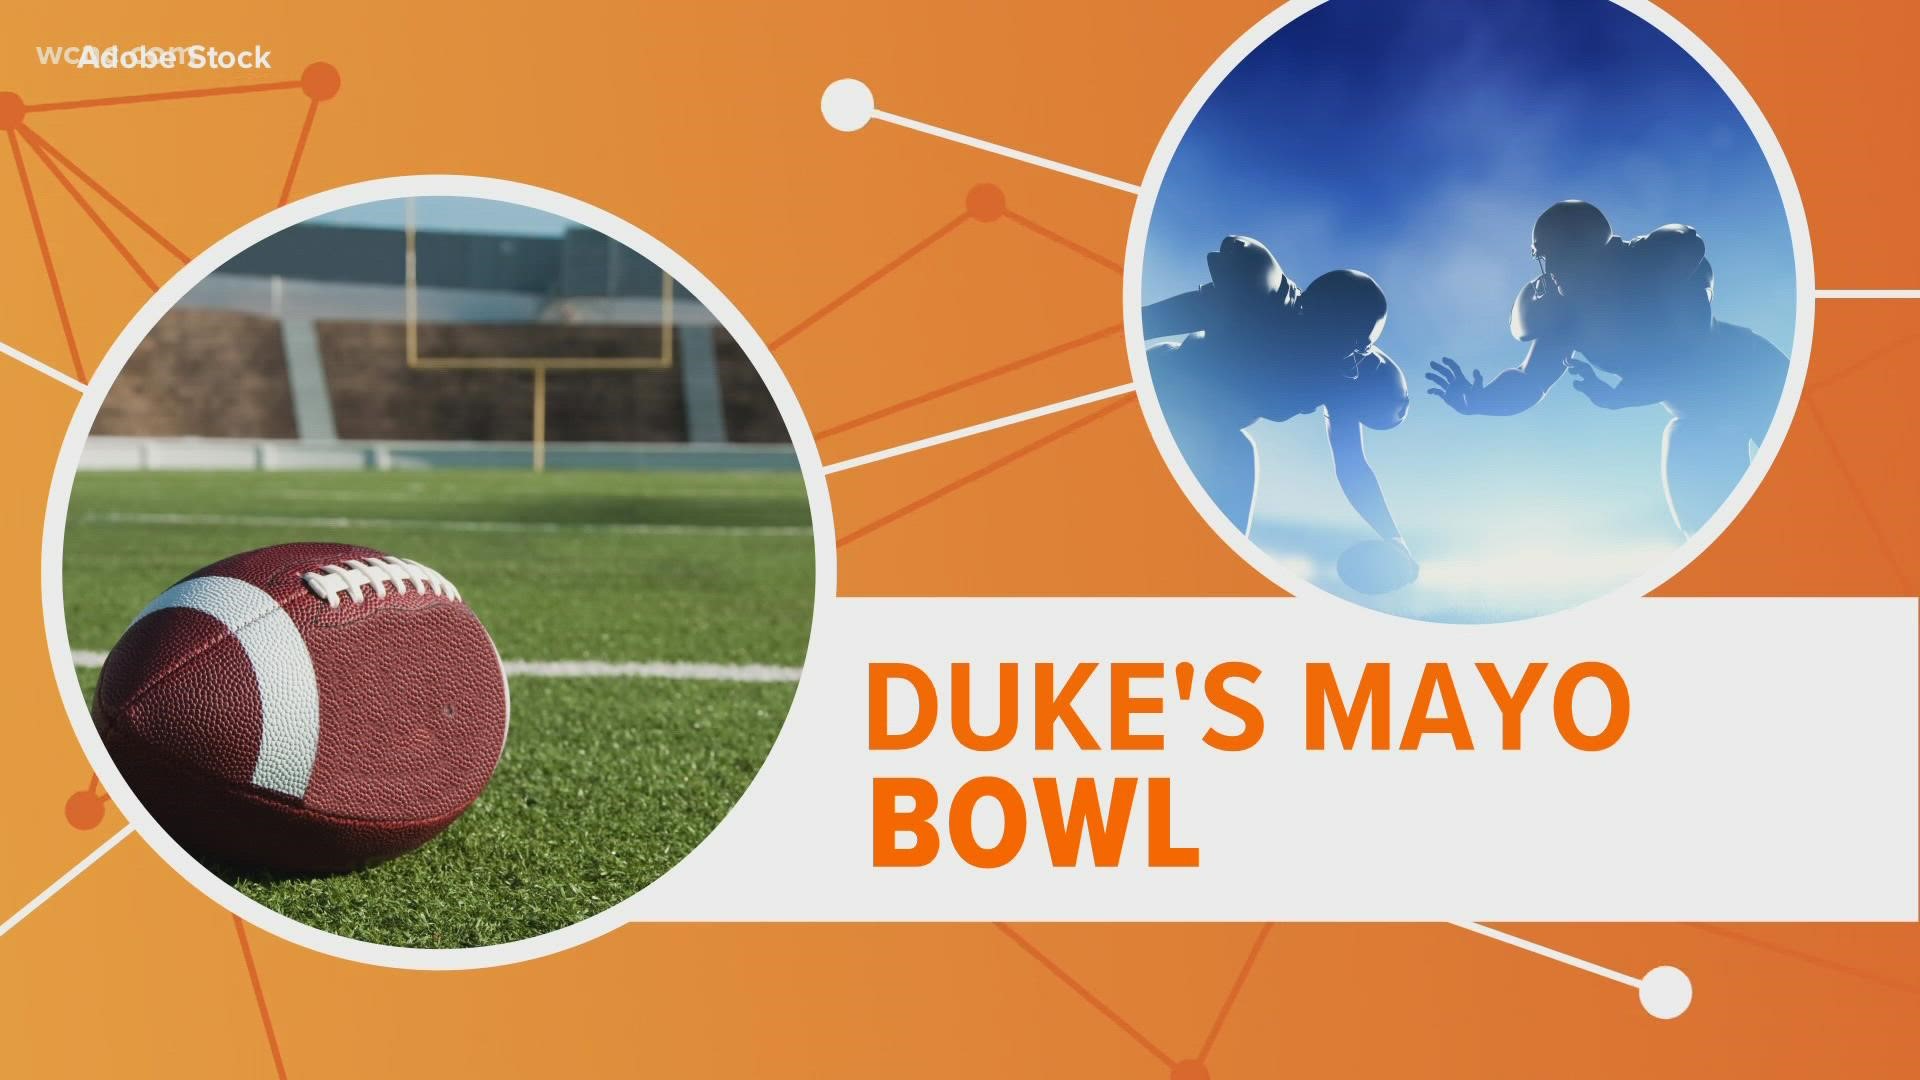 Football fans are taking over Uptown Charlotte for the Duke's Mayo Bowl, and this year's crowd could be particularly large, given the matchup.